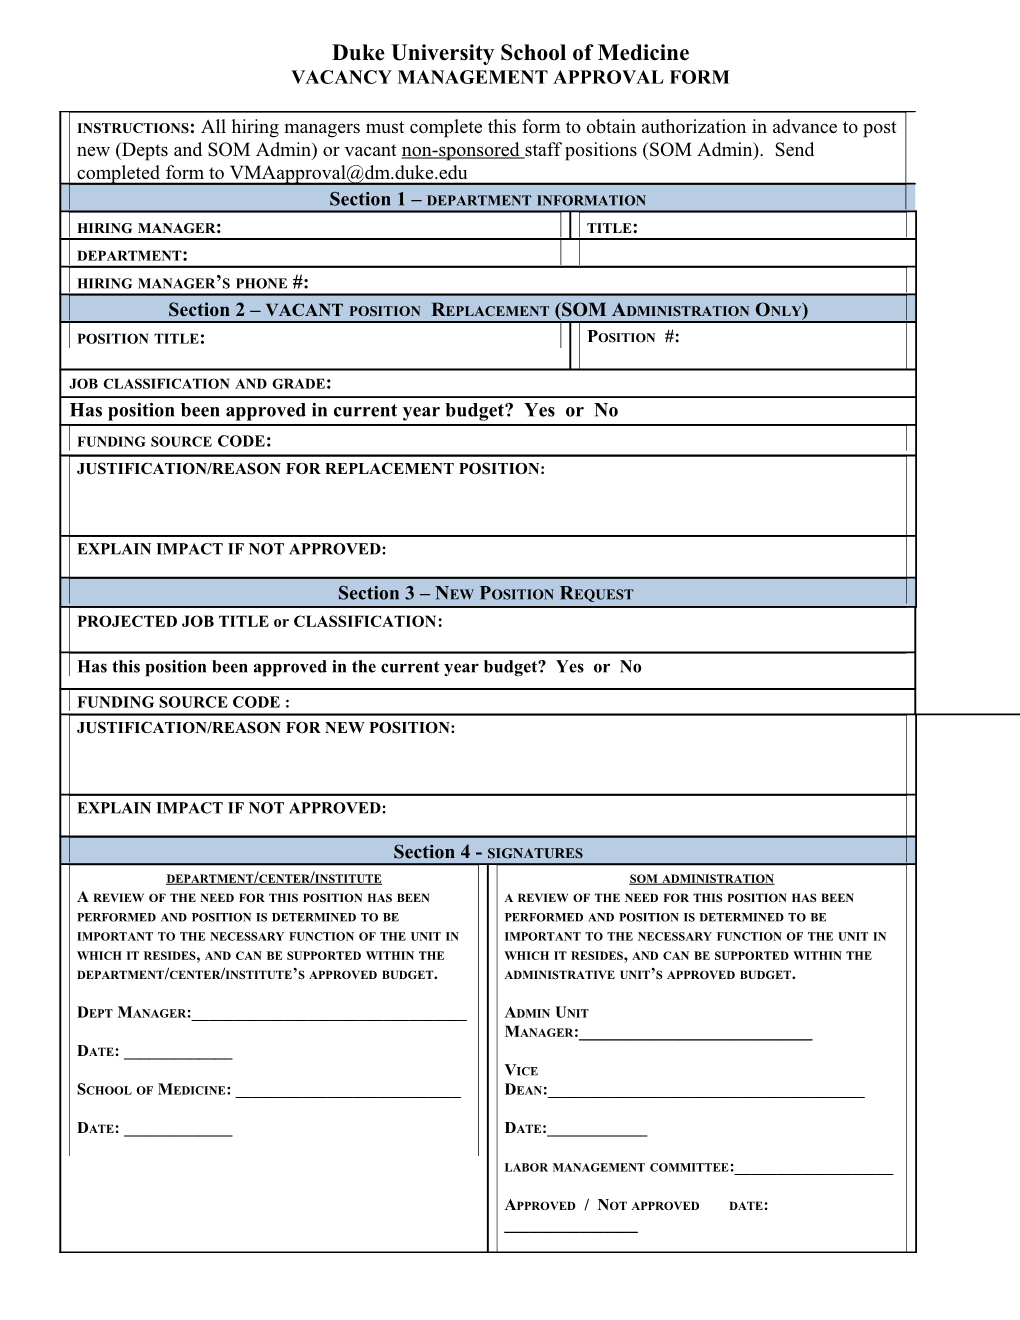 Vacancy Management Approval Form